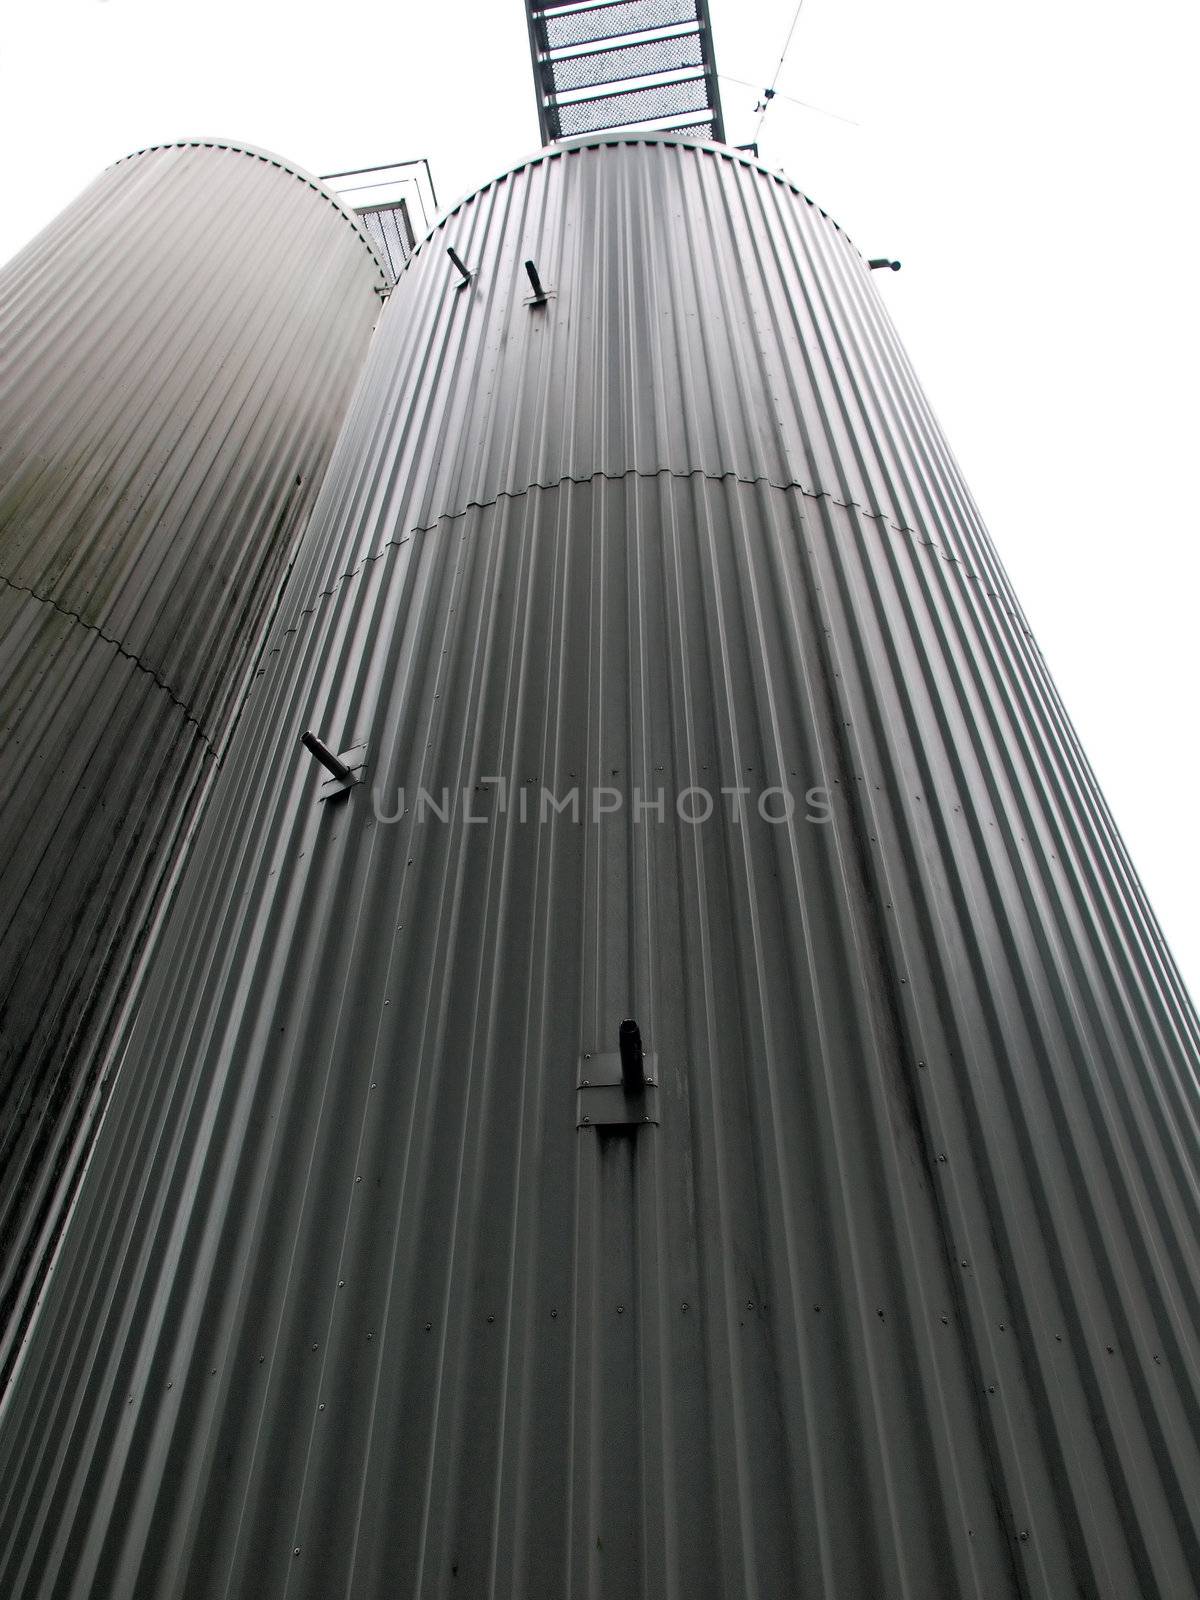 Big metal containers silo in a food plant        